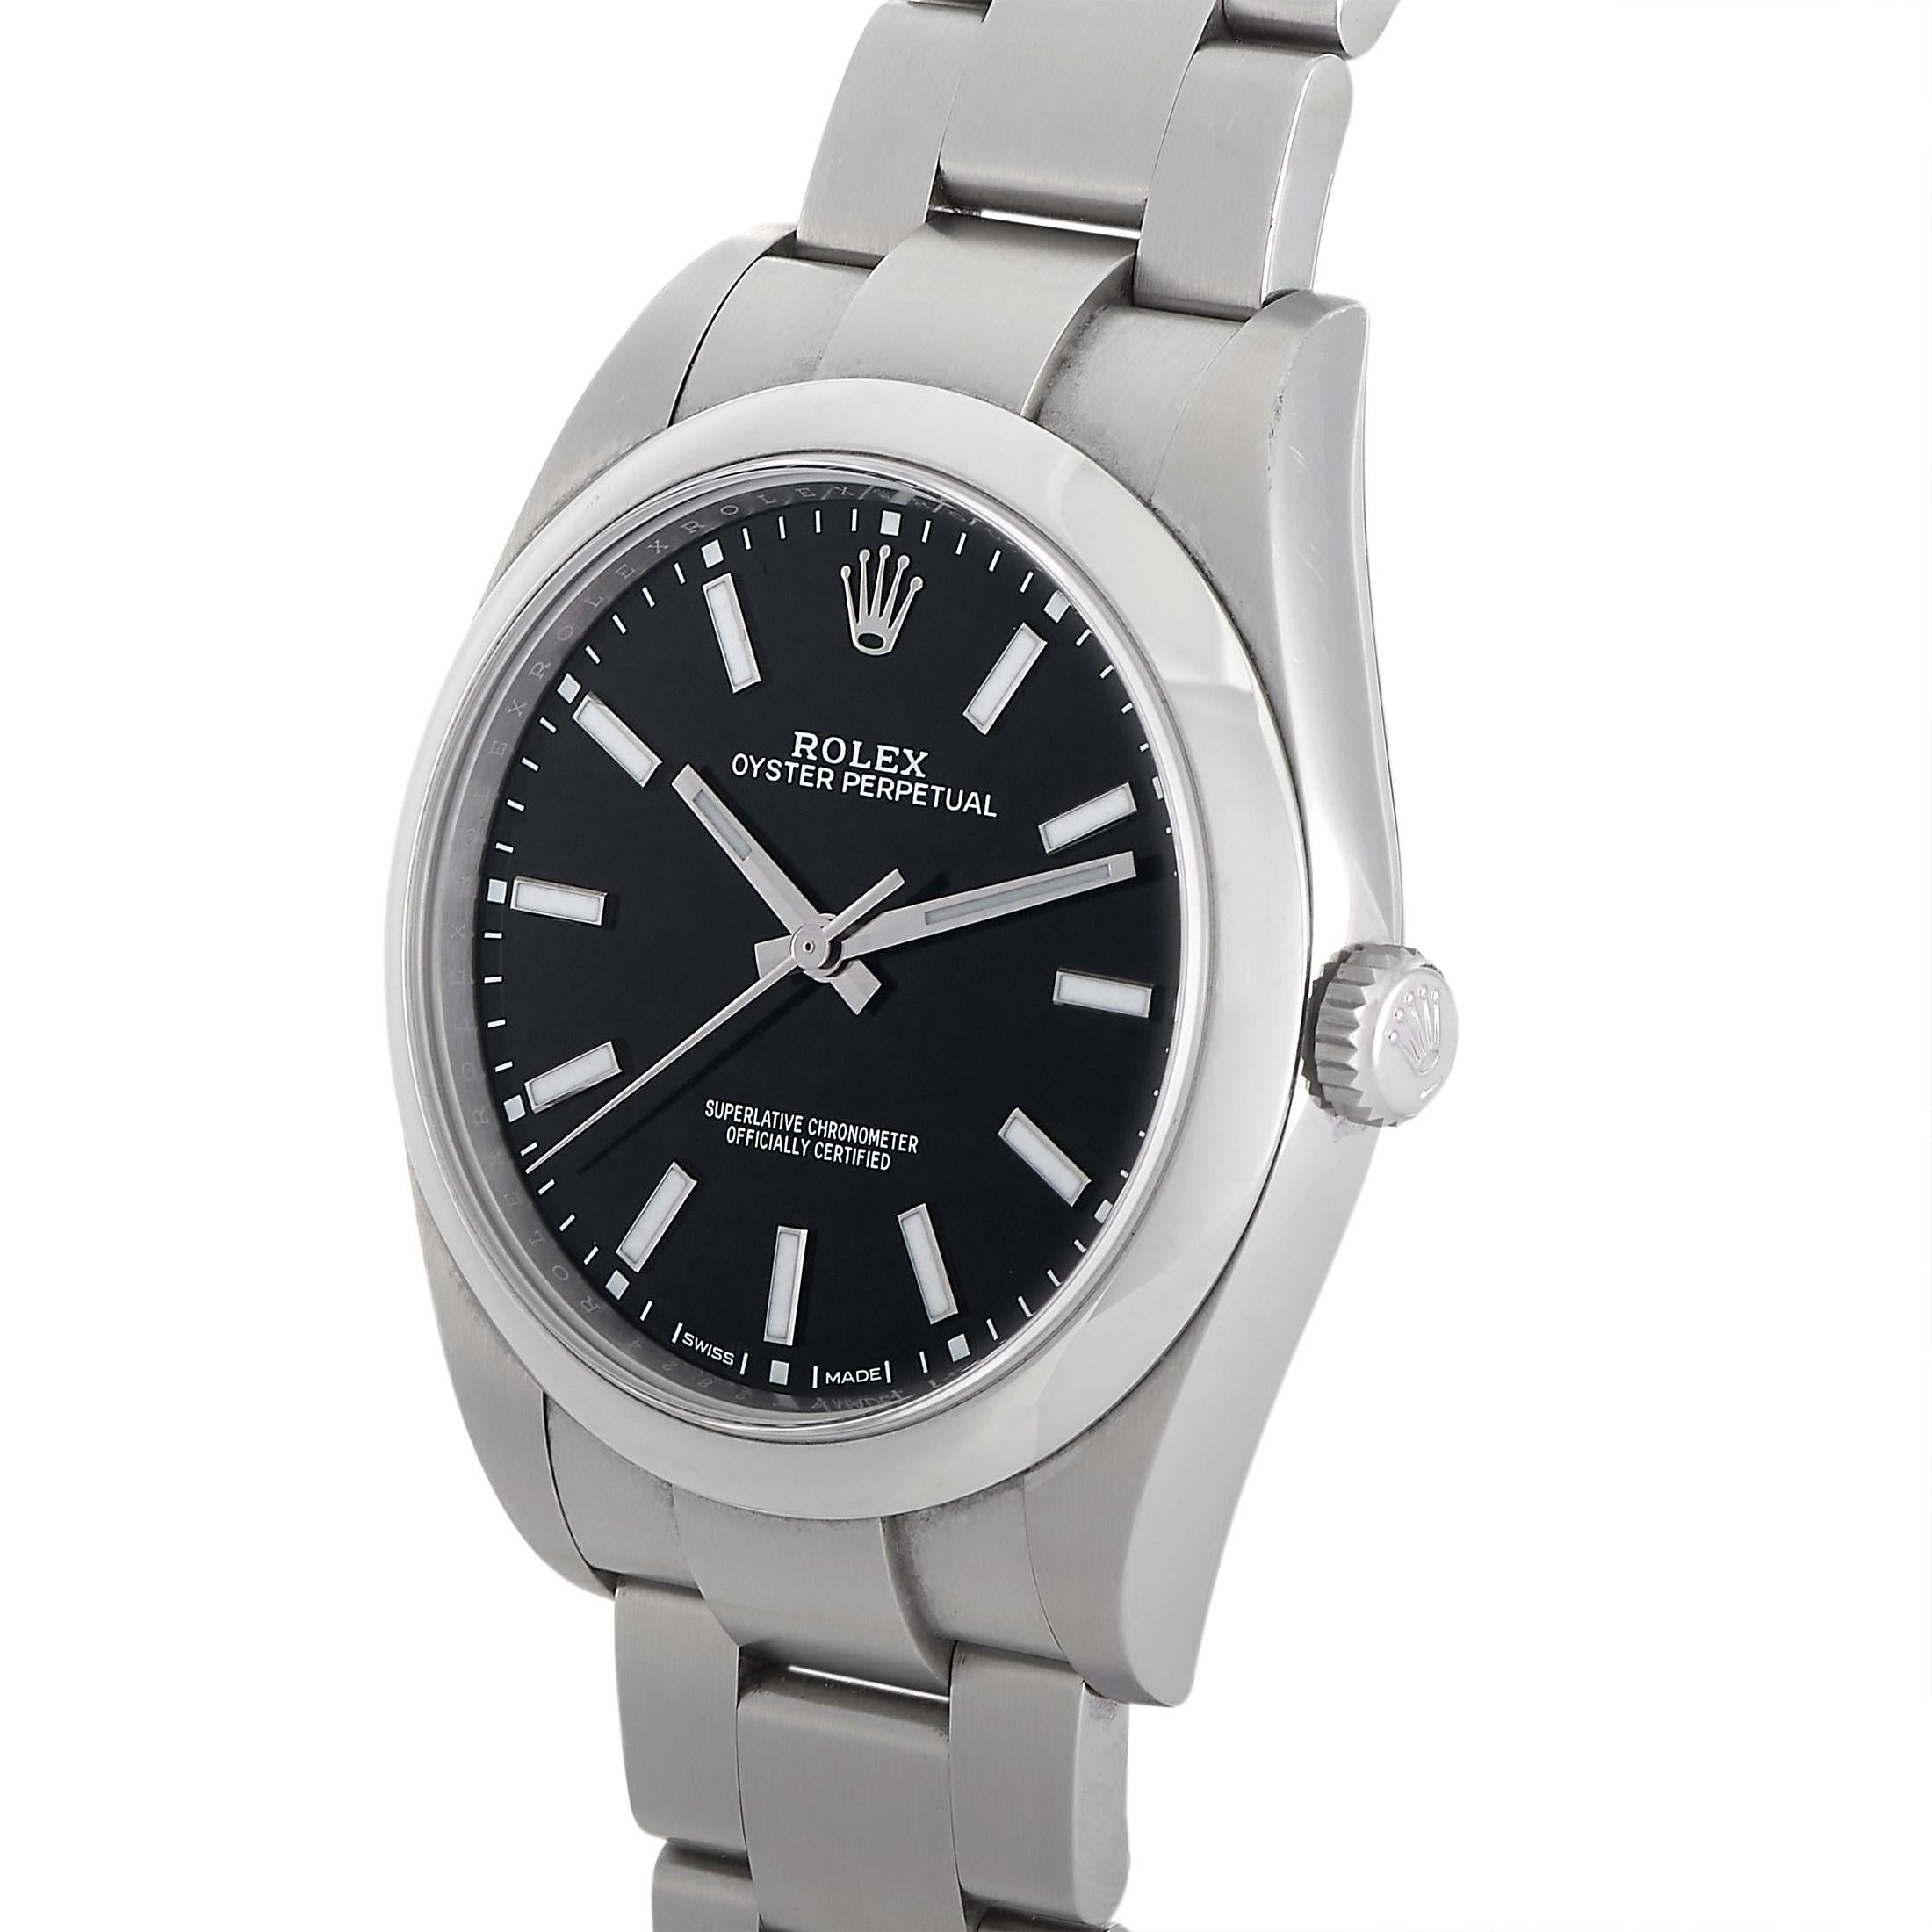 This Rolex Oyster Perpetual 39 mm Watch, reference number 114300-0005, features an oystersteel case measuring 39 mm in diameter. It is presented on a matching white oystersteel bracelet with deployant clasp. The black dial displays hours, minutes,